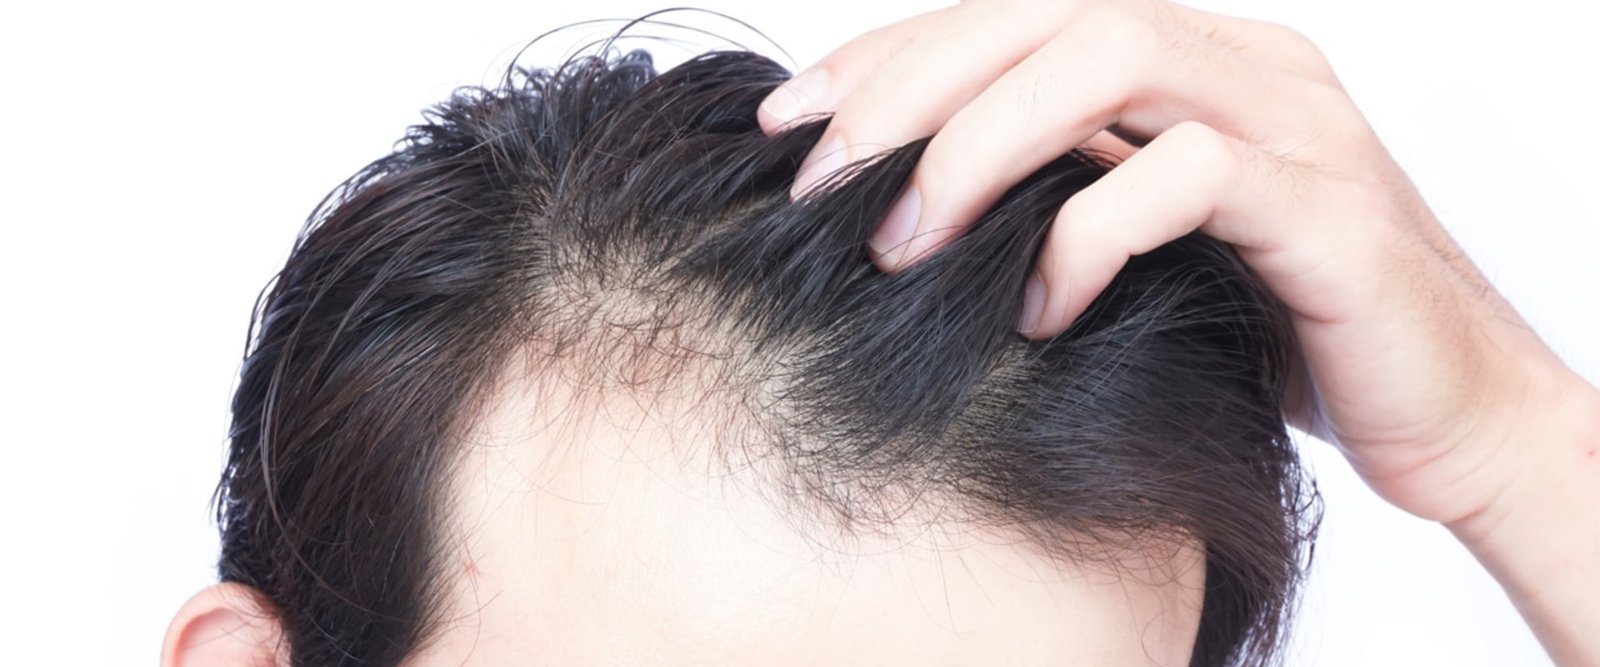 Is hair loss from not eating permanent?